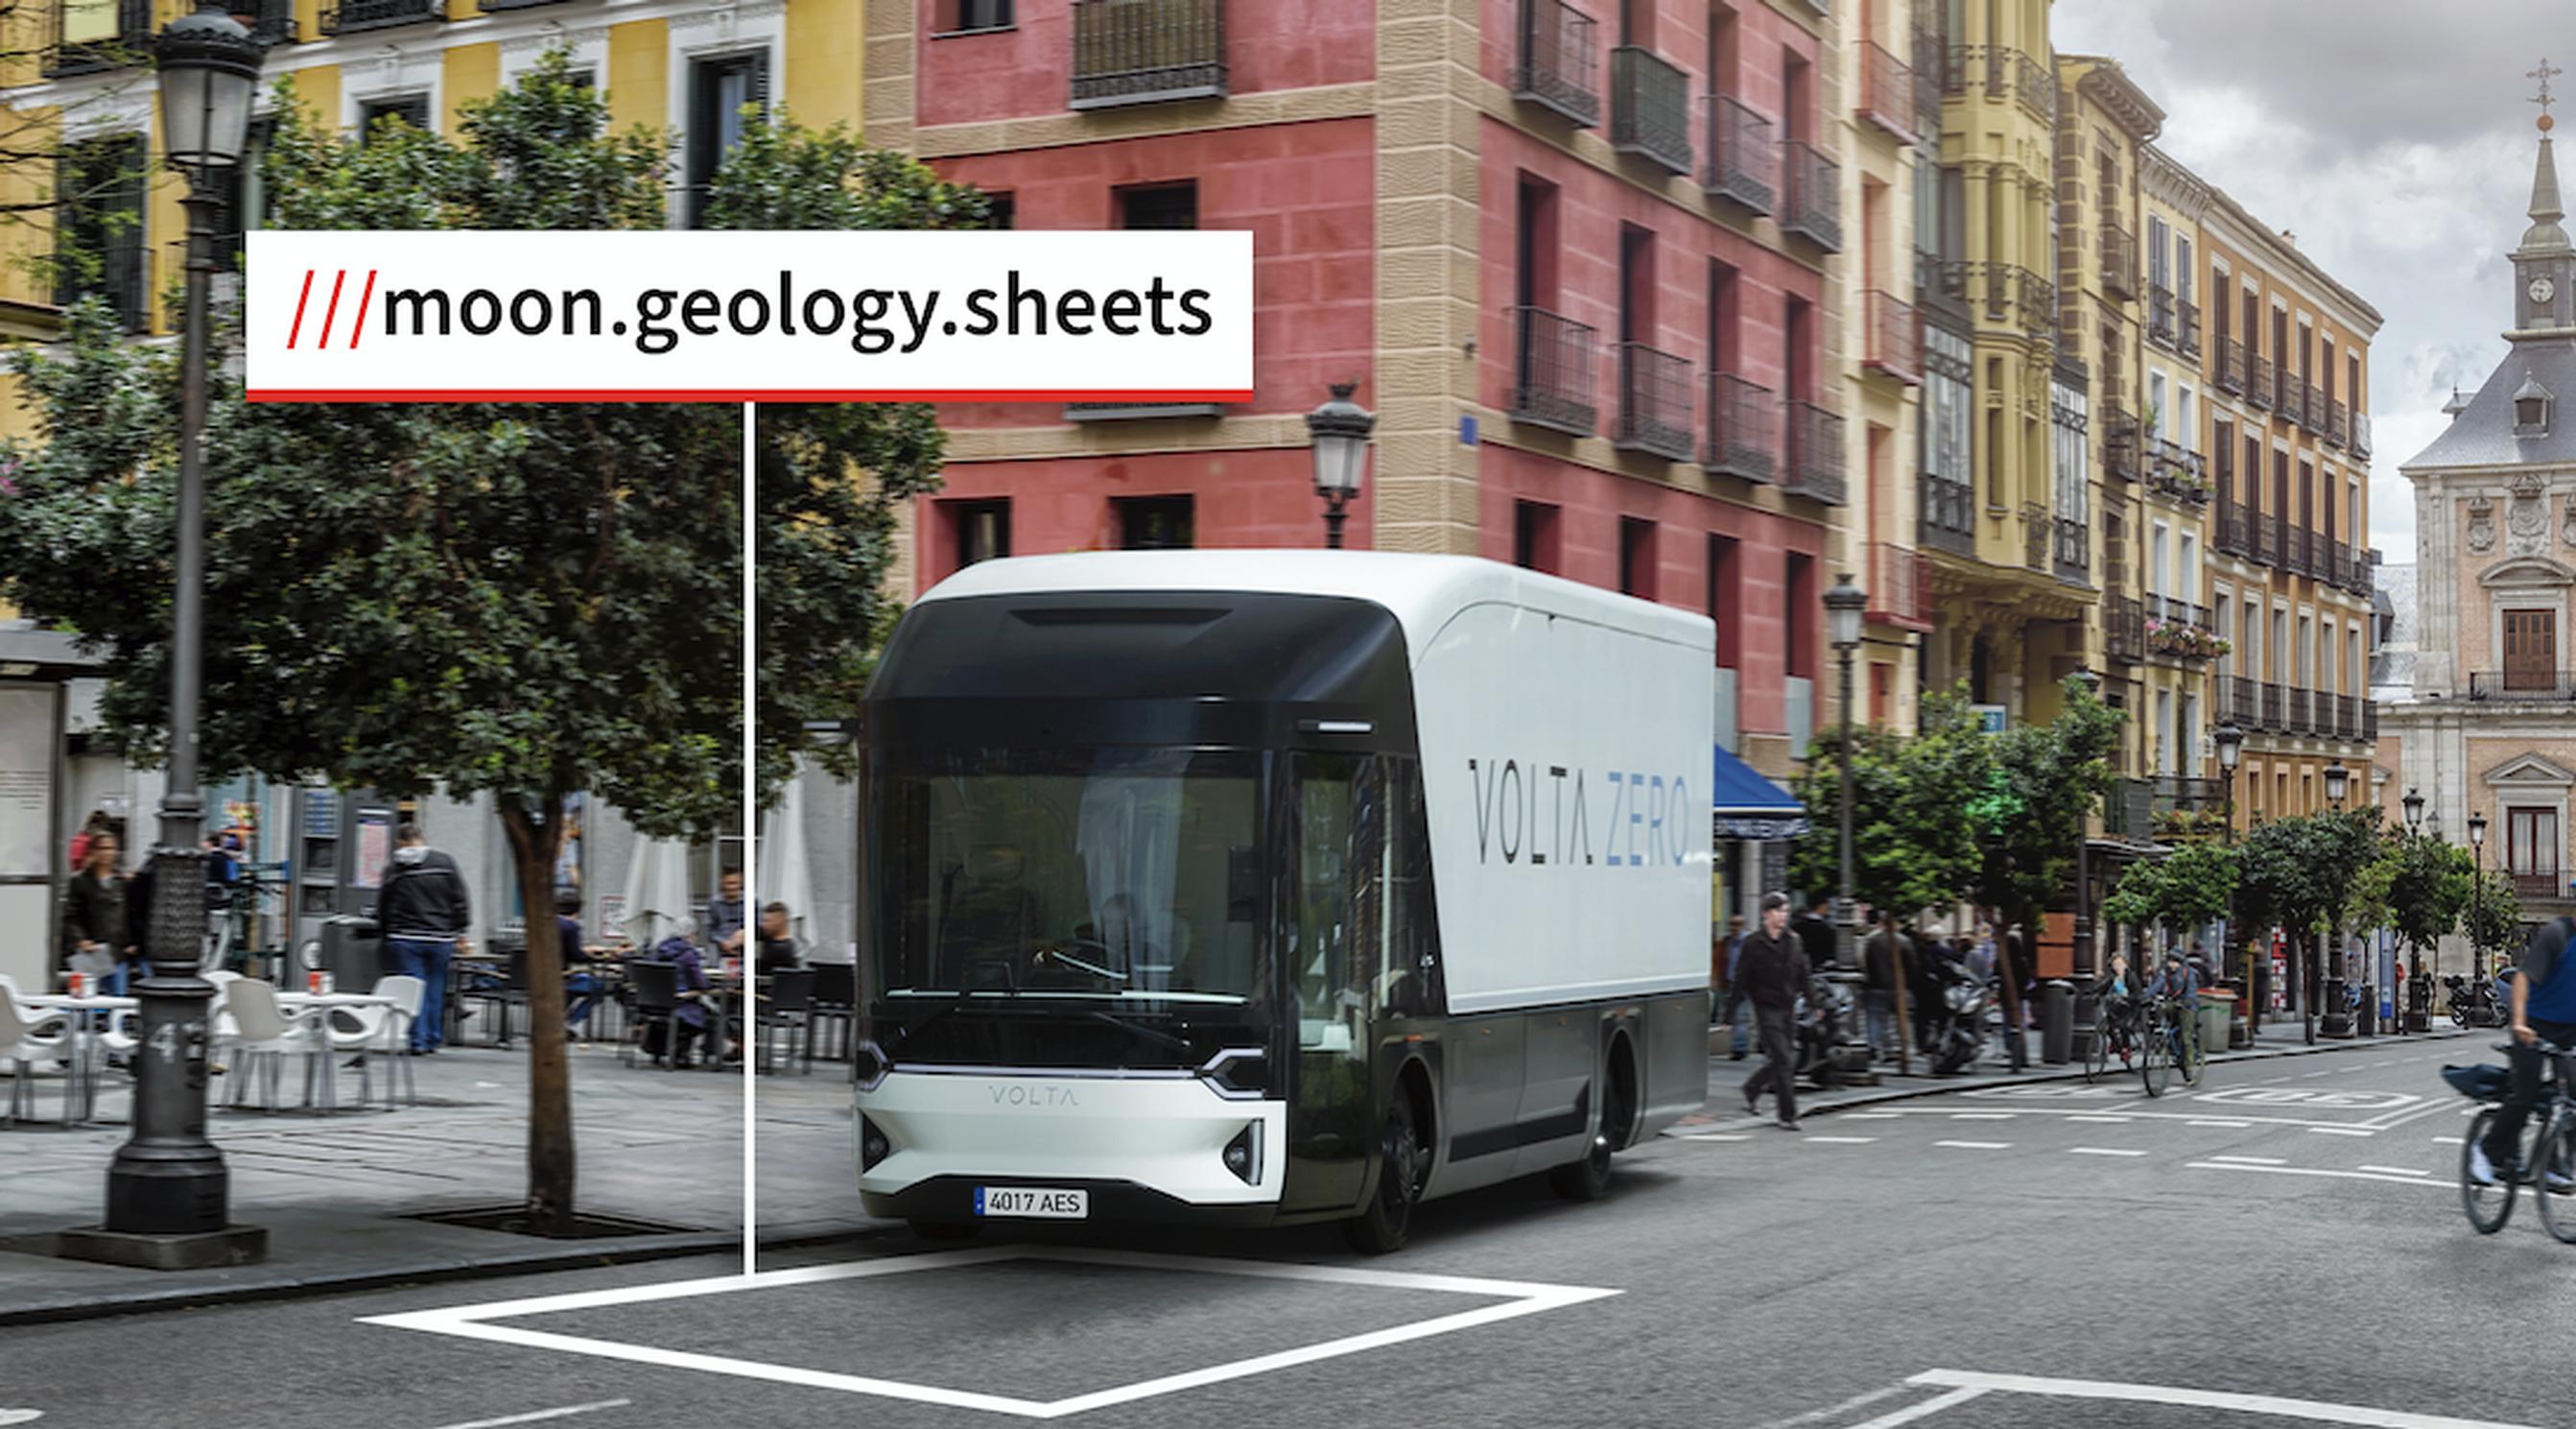 With HERE Navigation, Volta truck drivers will be able to use what3words, a geolocation technology that identifies a location in a manner that is more precise than a street address.